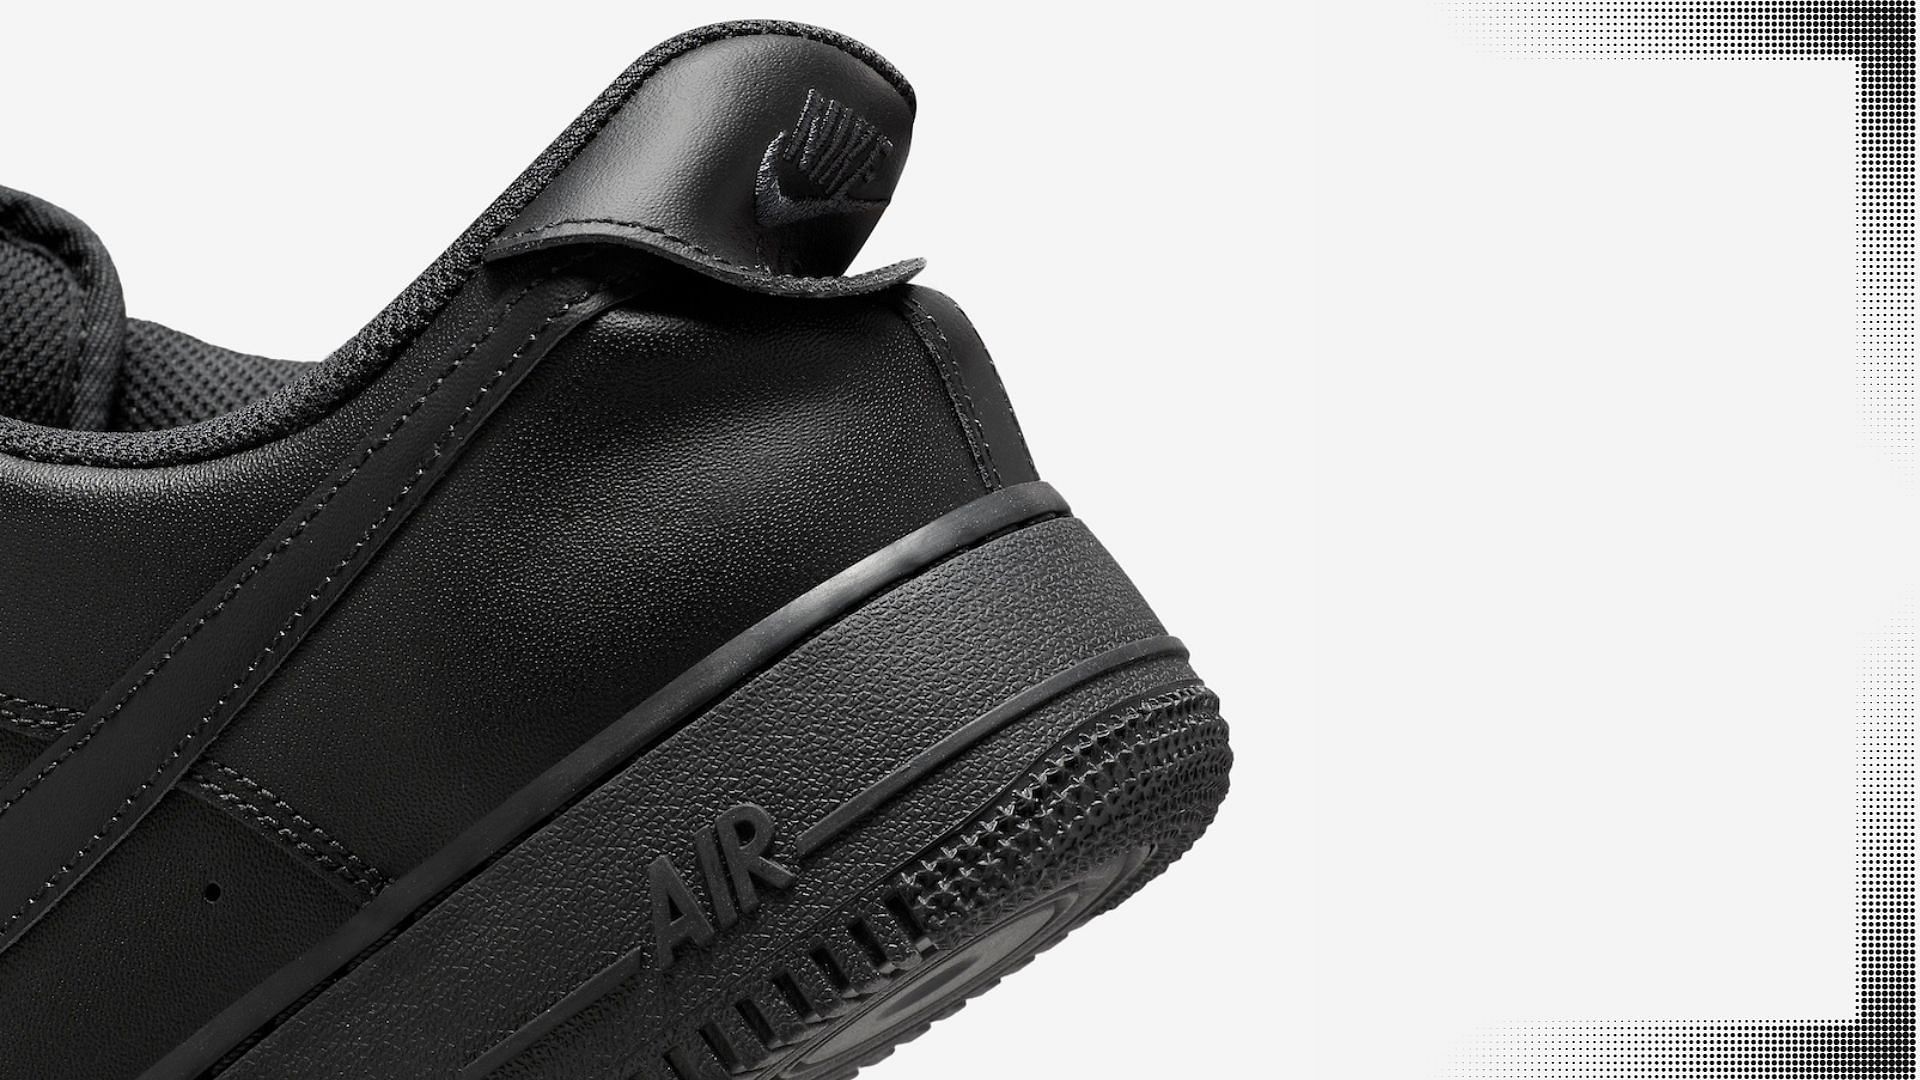 Take a closer look at the EasyOn heel counters of the sneaker (Image via Nike)